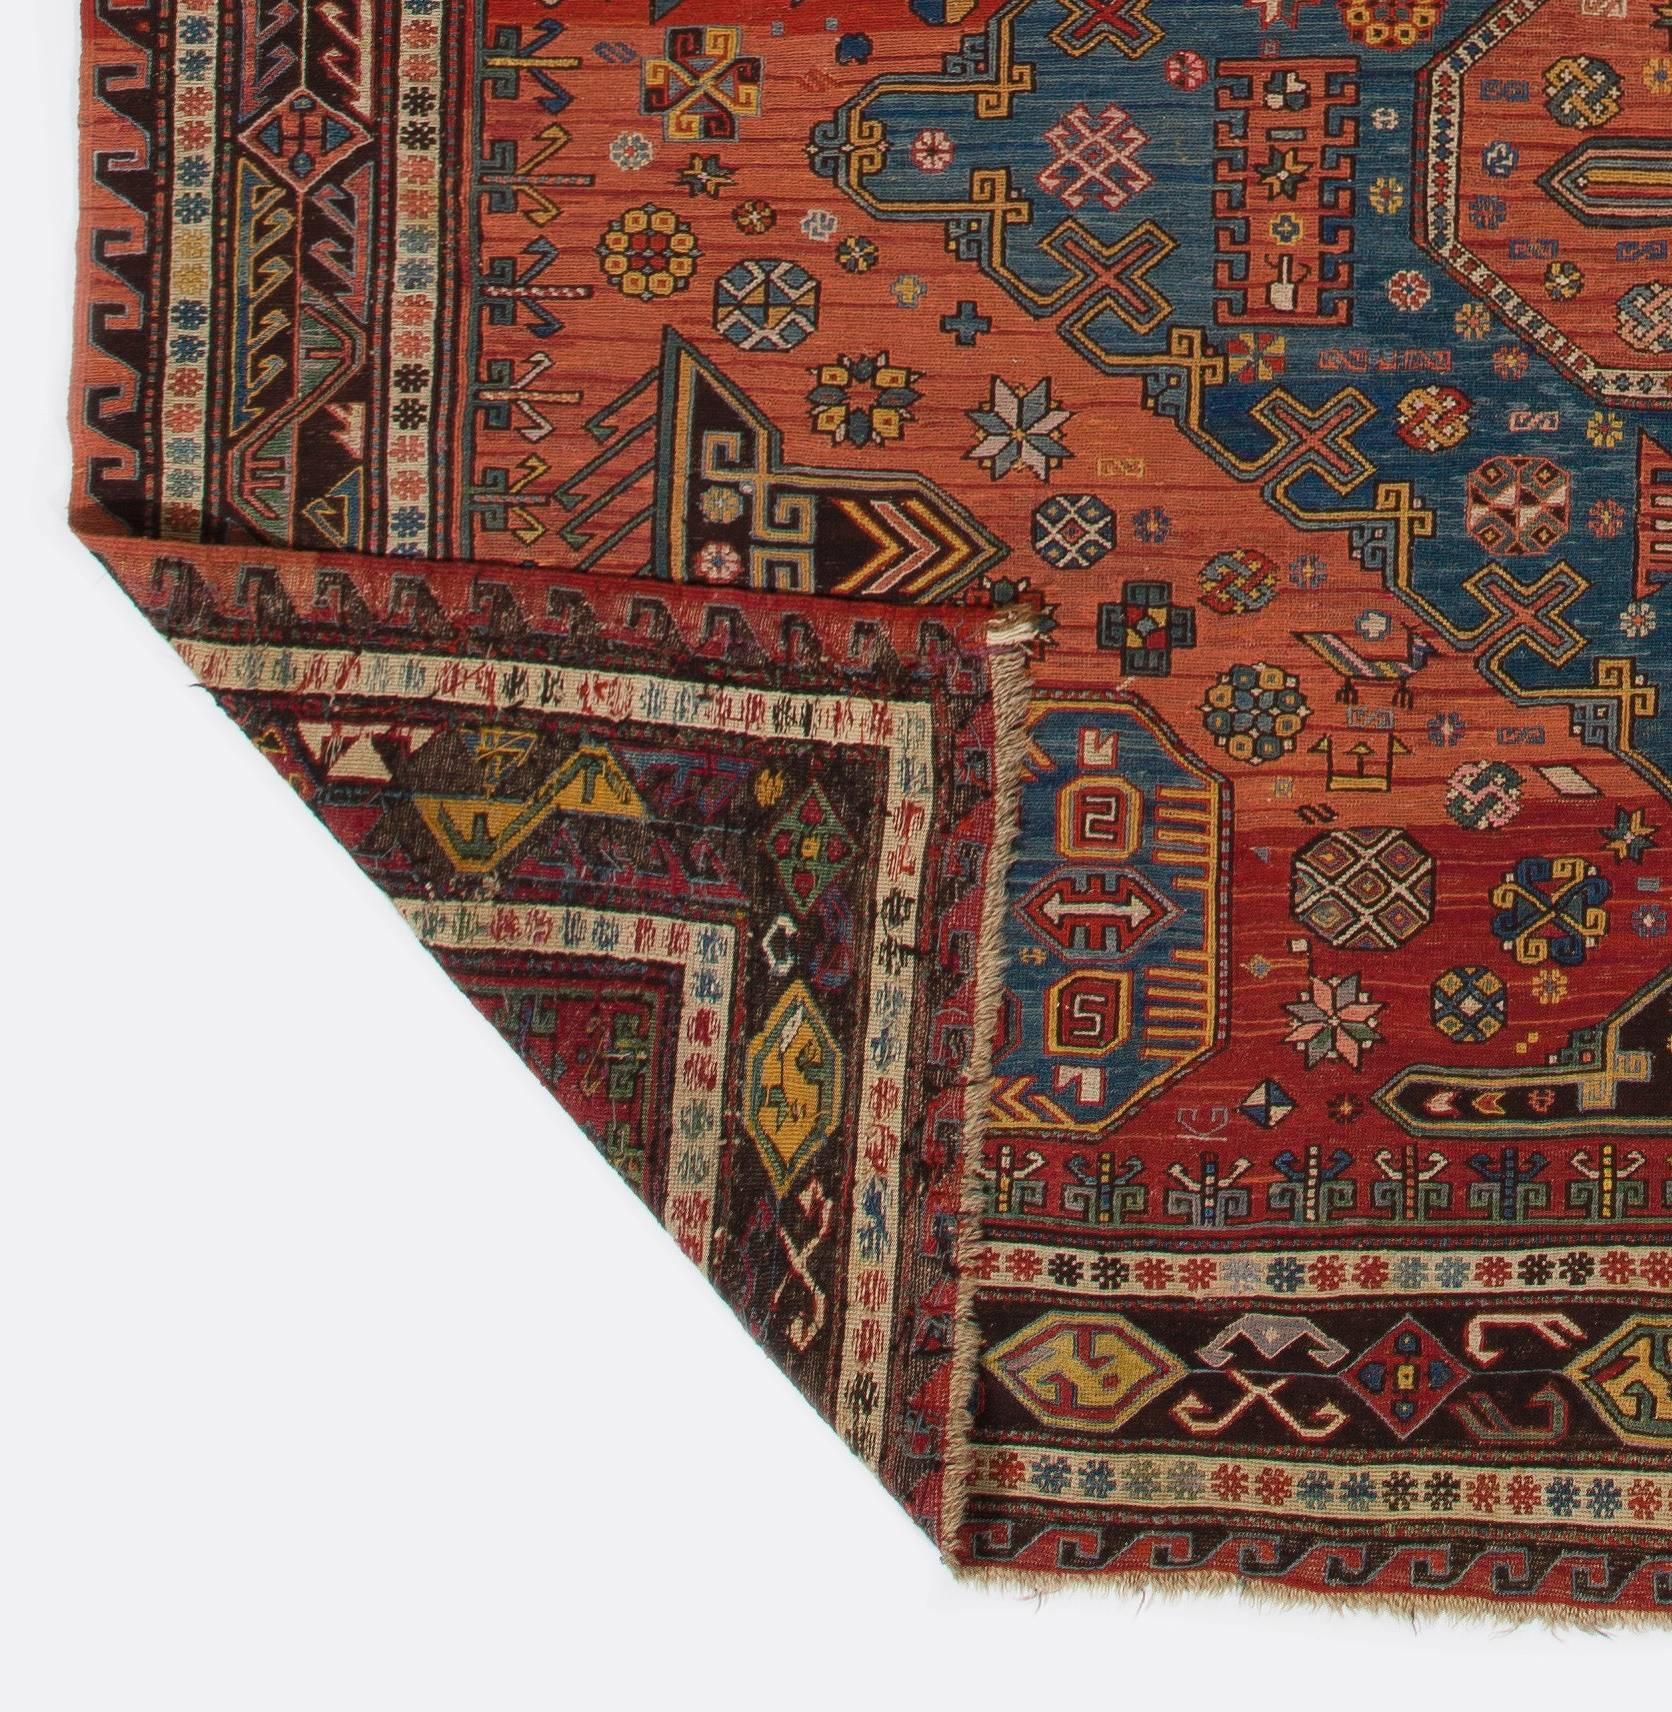 Soumak (also spelled Soumakh, Sumak, Sumac, or Soumac) is a tapestry technique of weaving strong and decorative textiles used as rugs and domestic bags. Soumak is a type of flat-weave, somewhat resembling but stronger and thicker than Kilim, with a